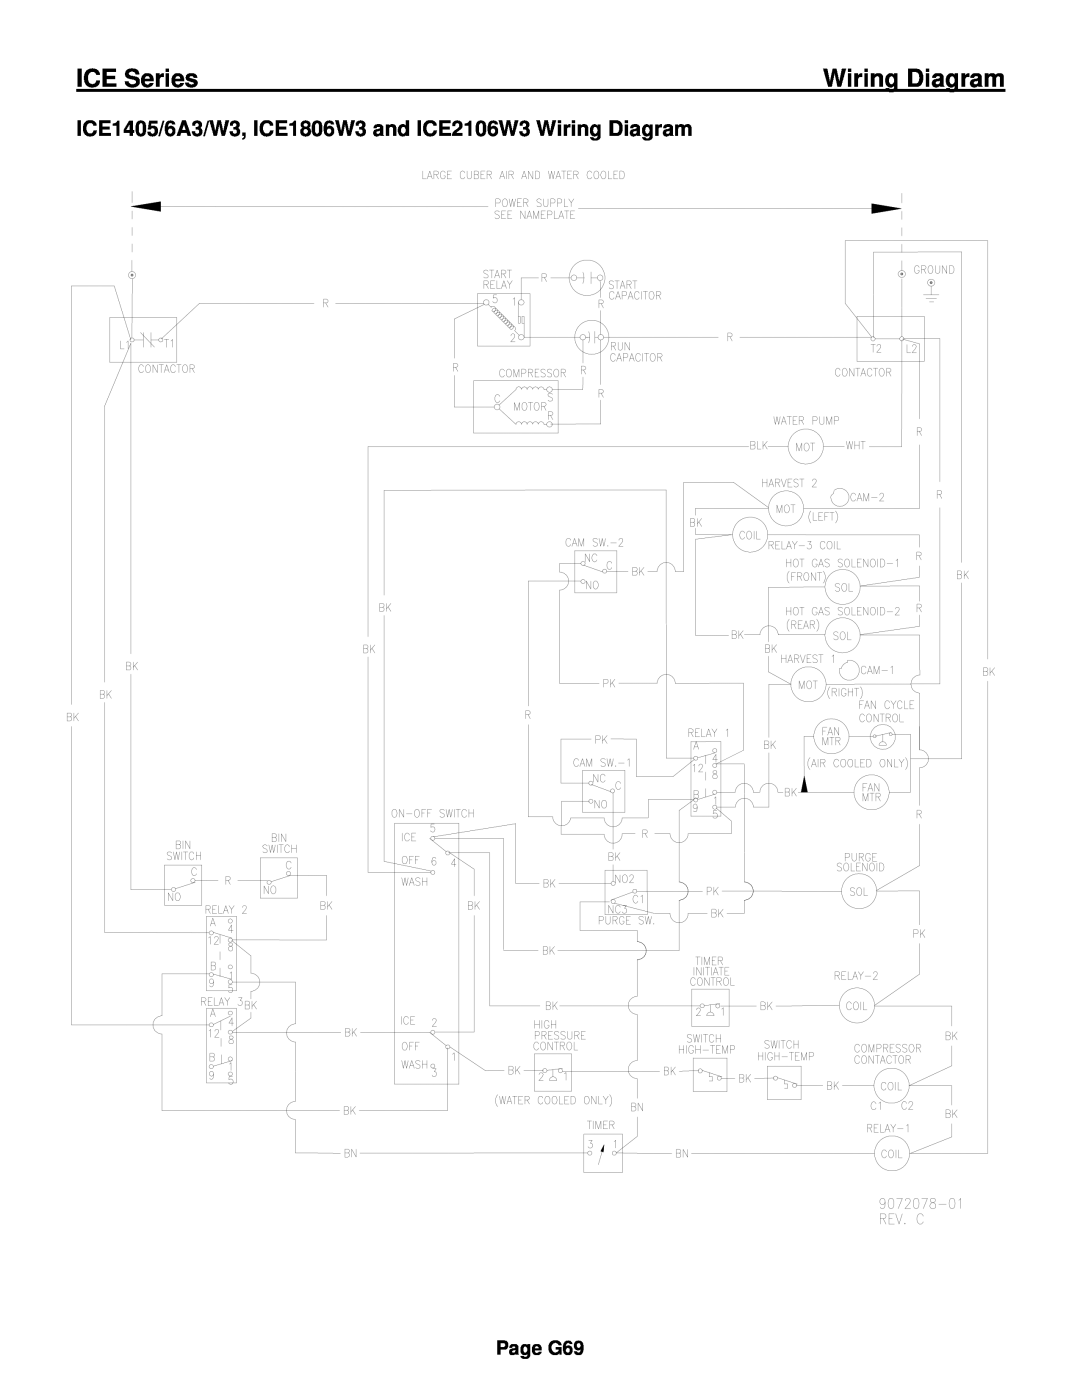 Ice-O-Matic ICE0250 Series installation manual ICE1405/6A3/W3, ICE1806W3 and ICE2106W3 Wiring Diagram, ICE Series, Page G69 